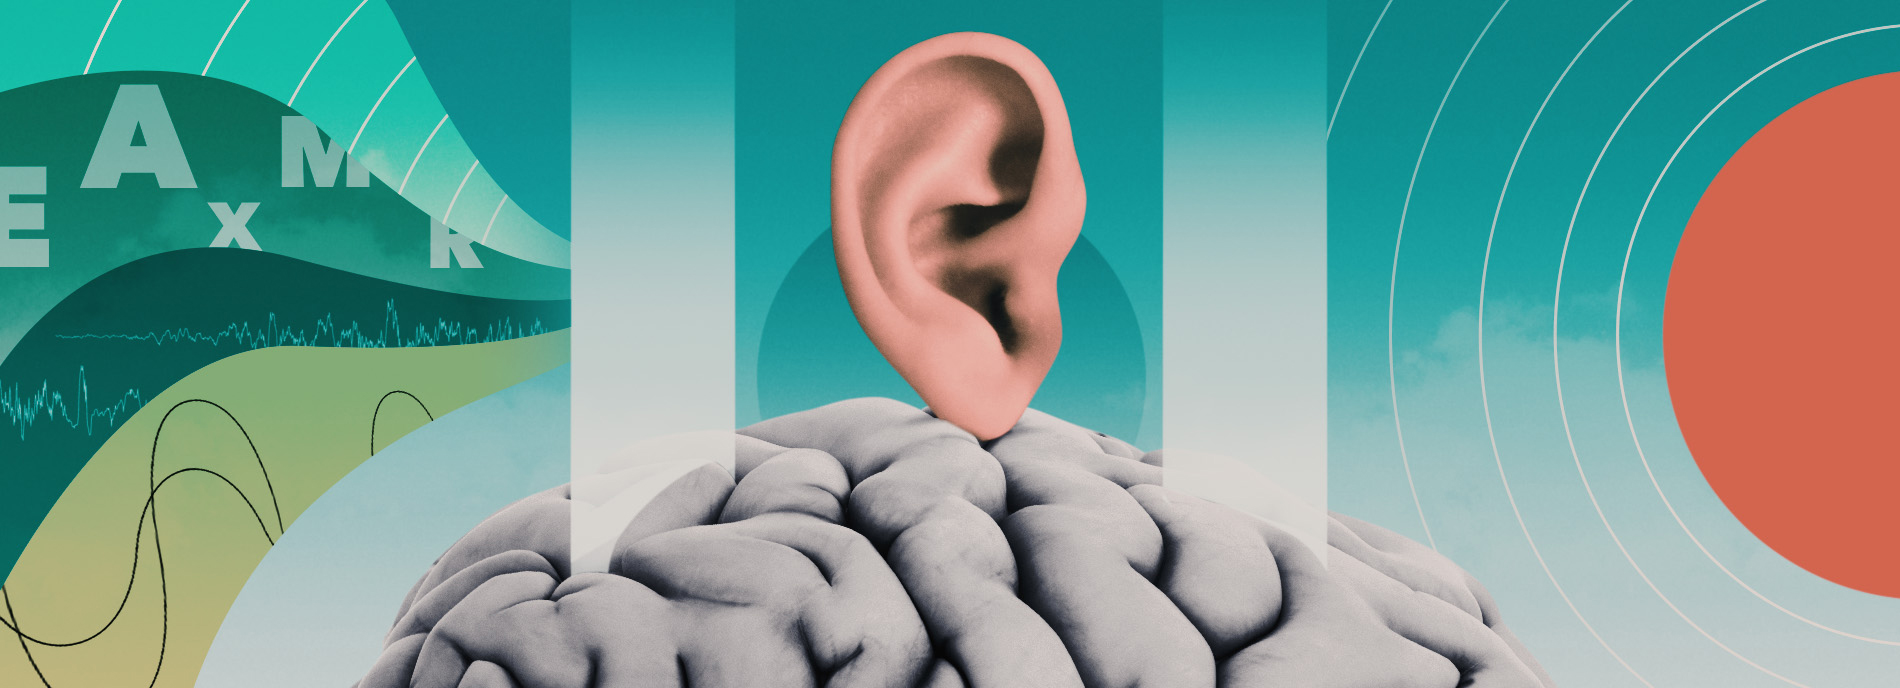 Illustration shows an ear balancing on a brain, surrounded by barriers blocking sound waves coming towards it.